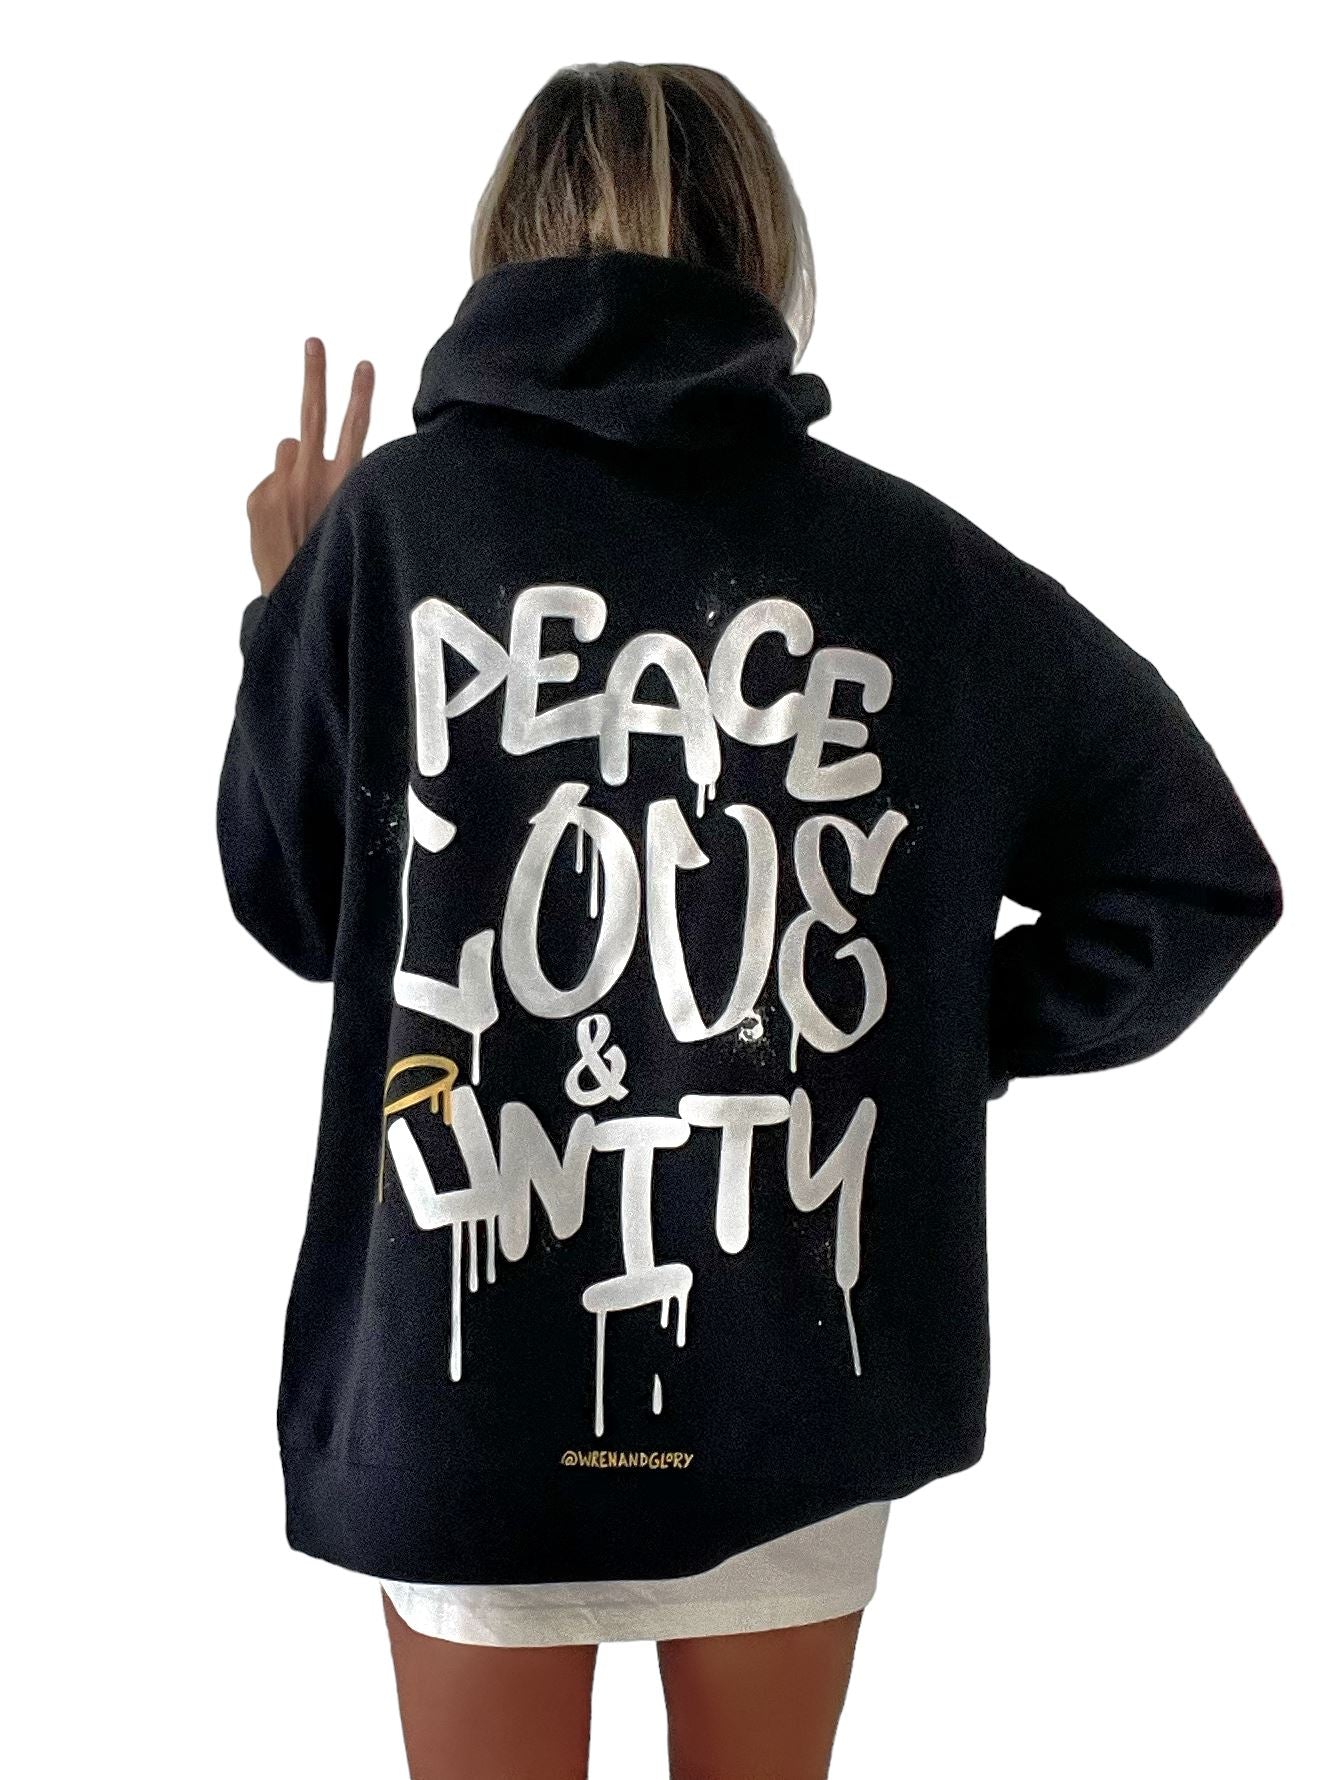 50thAHH 'Unity' Hoodie